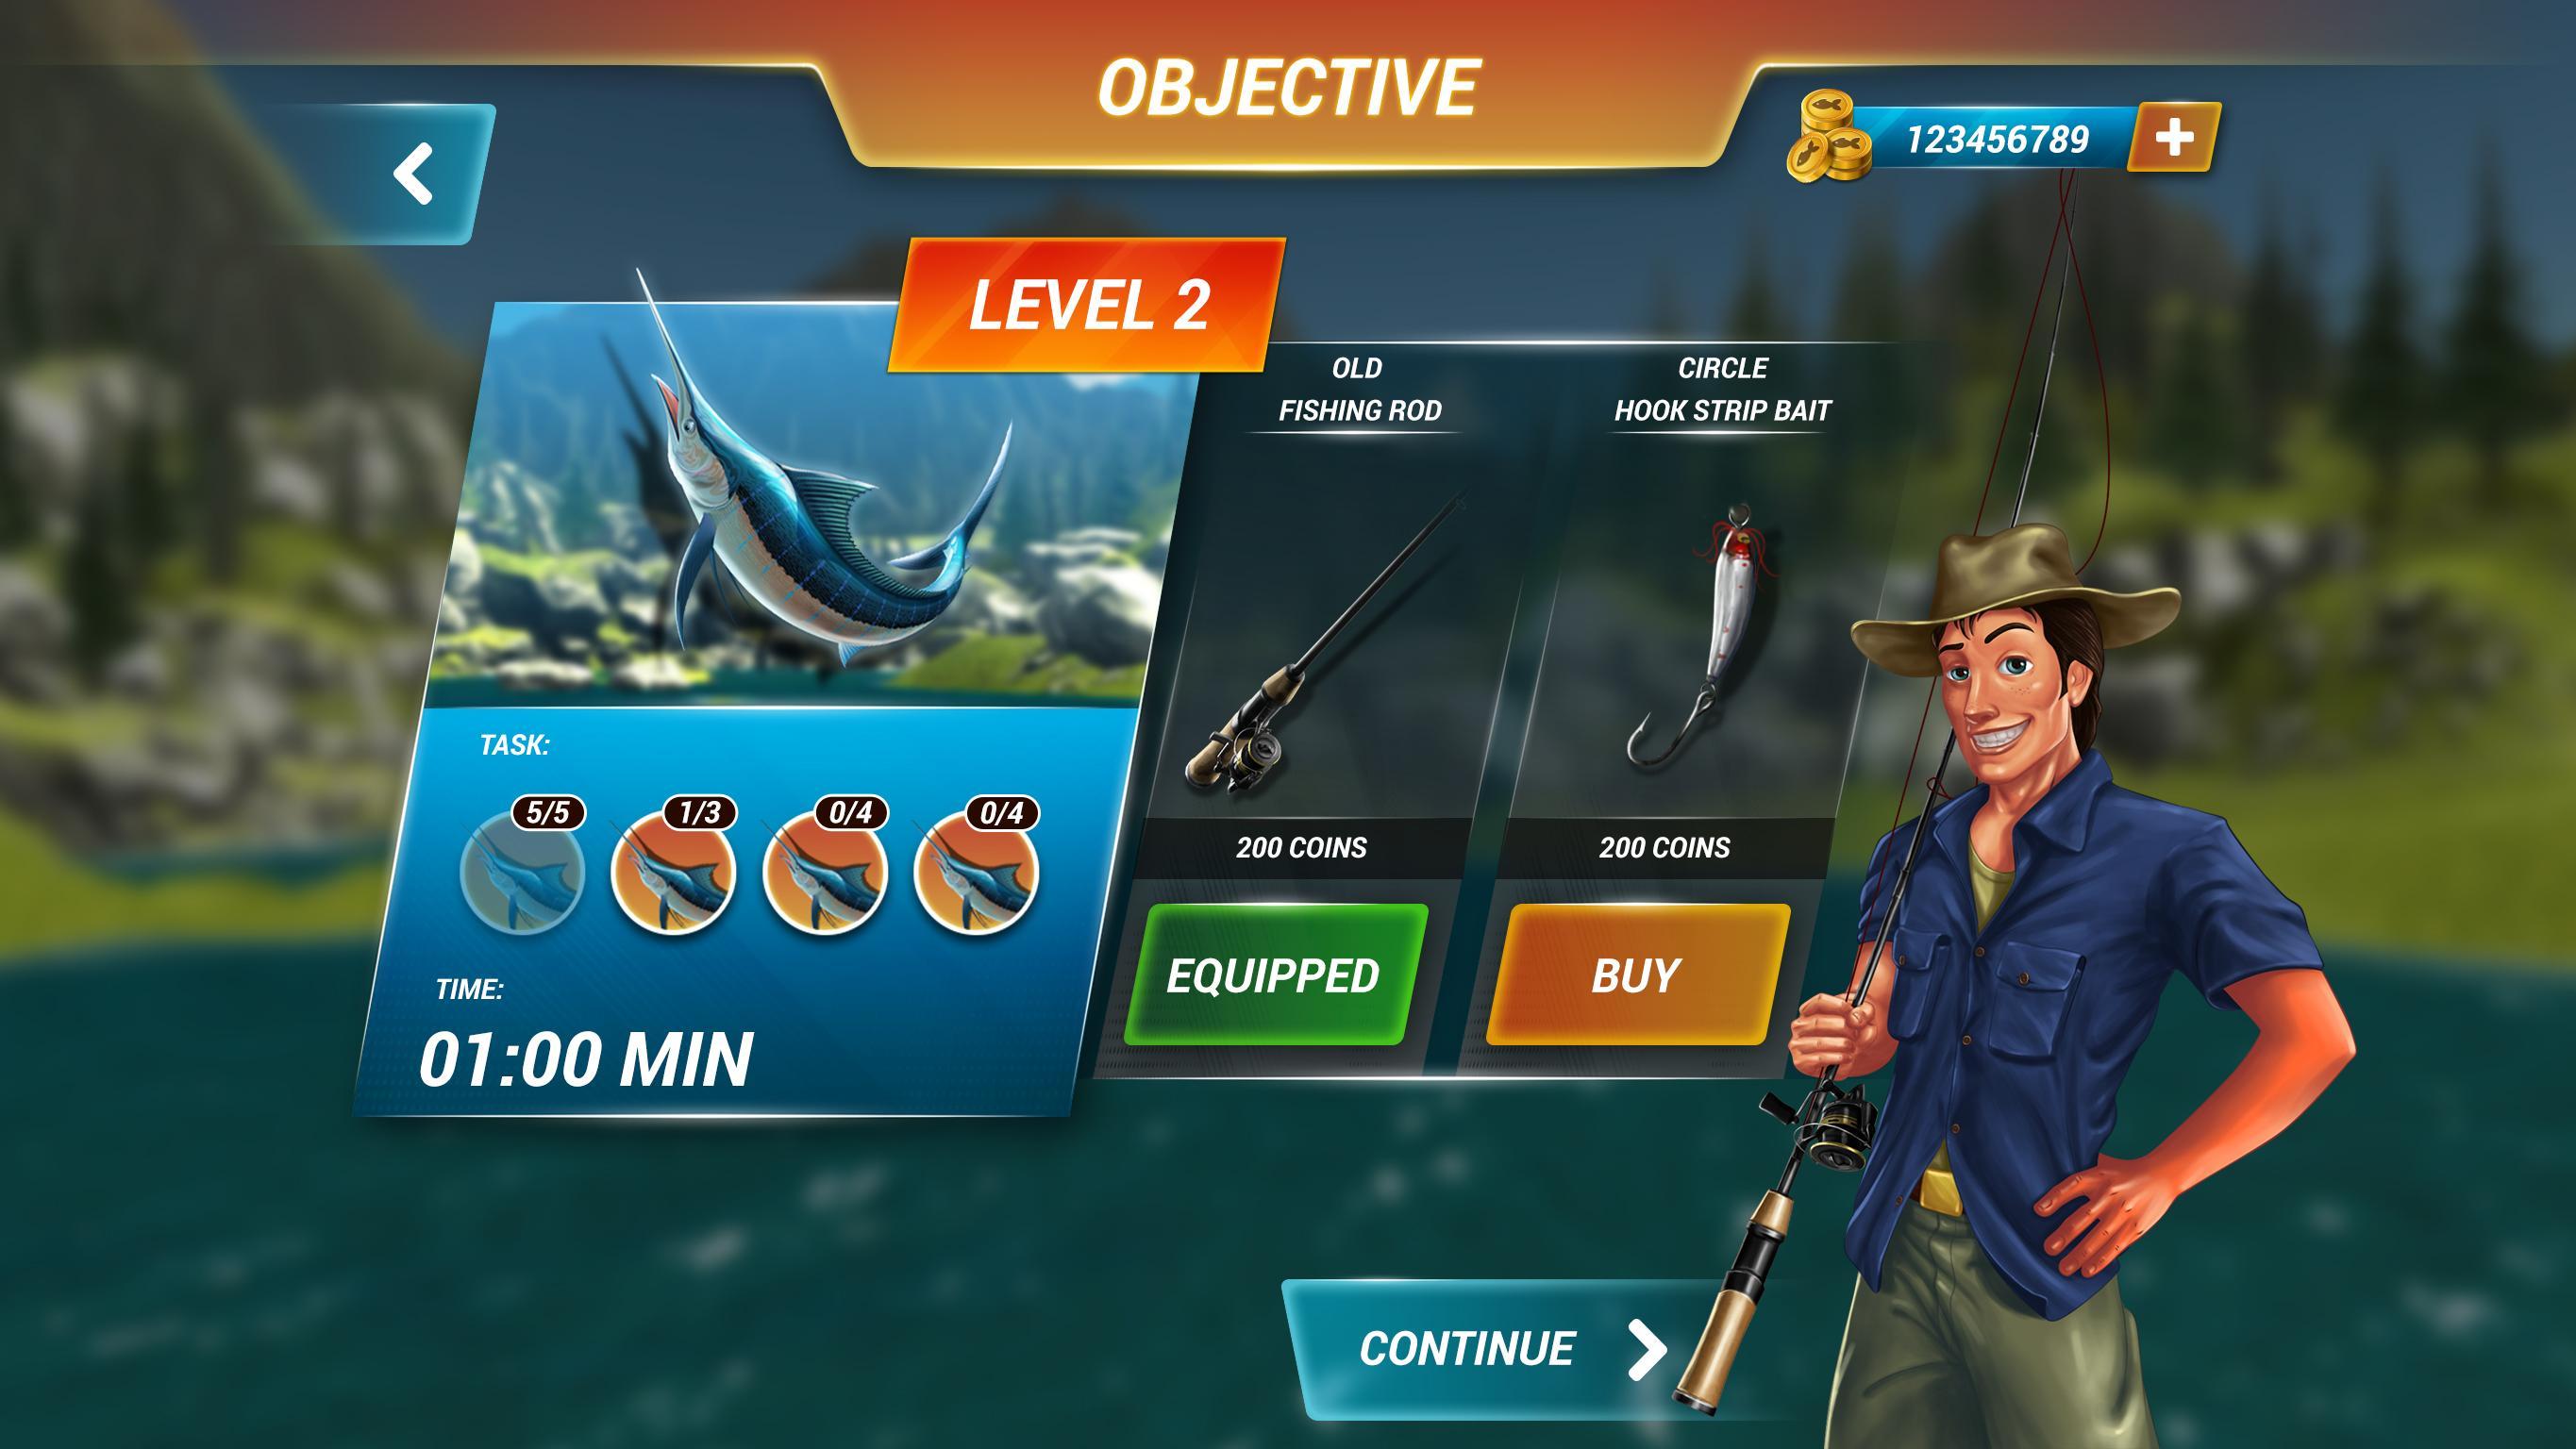 deep sea tycoon for mobile